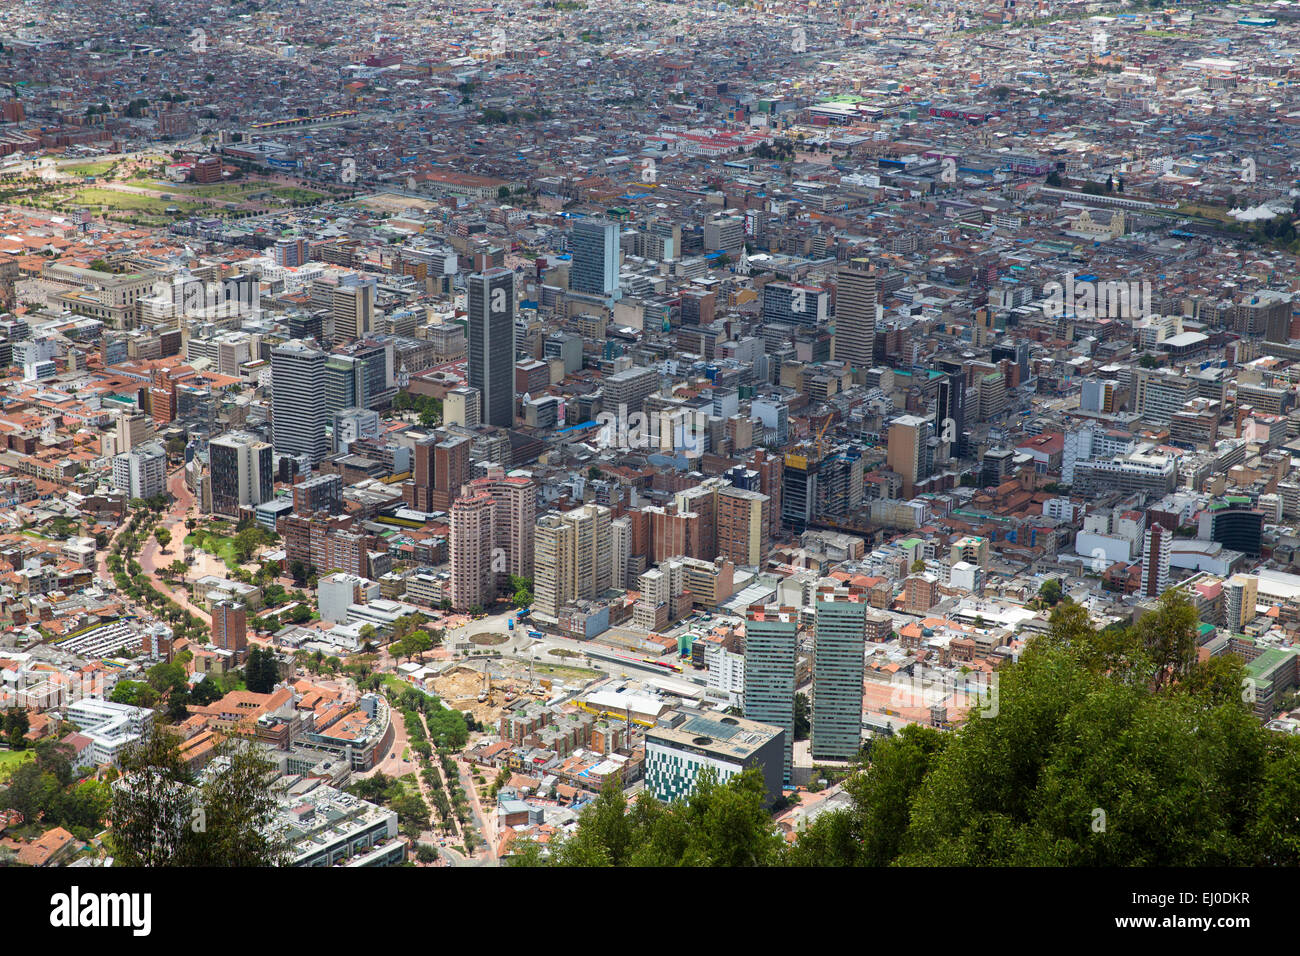 South America, Latin America, Colombia, town, city, towns, cities, town view, Bogota, capital, overview, Stock Photo